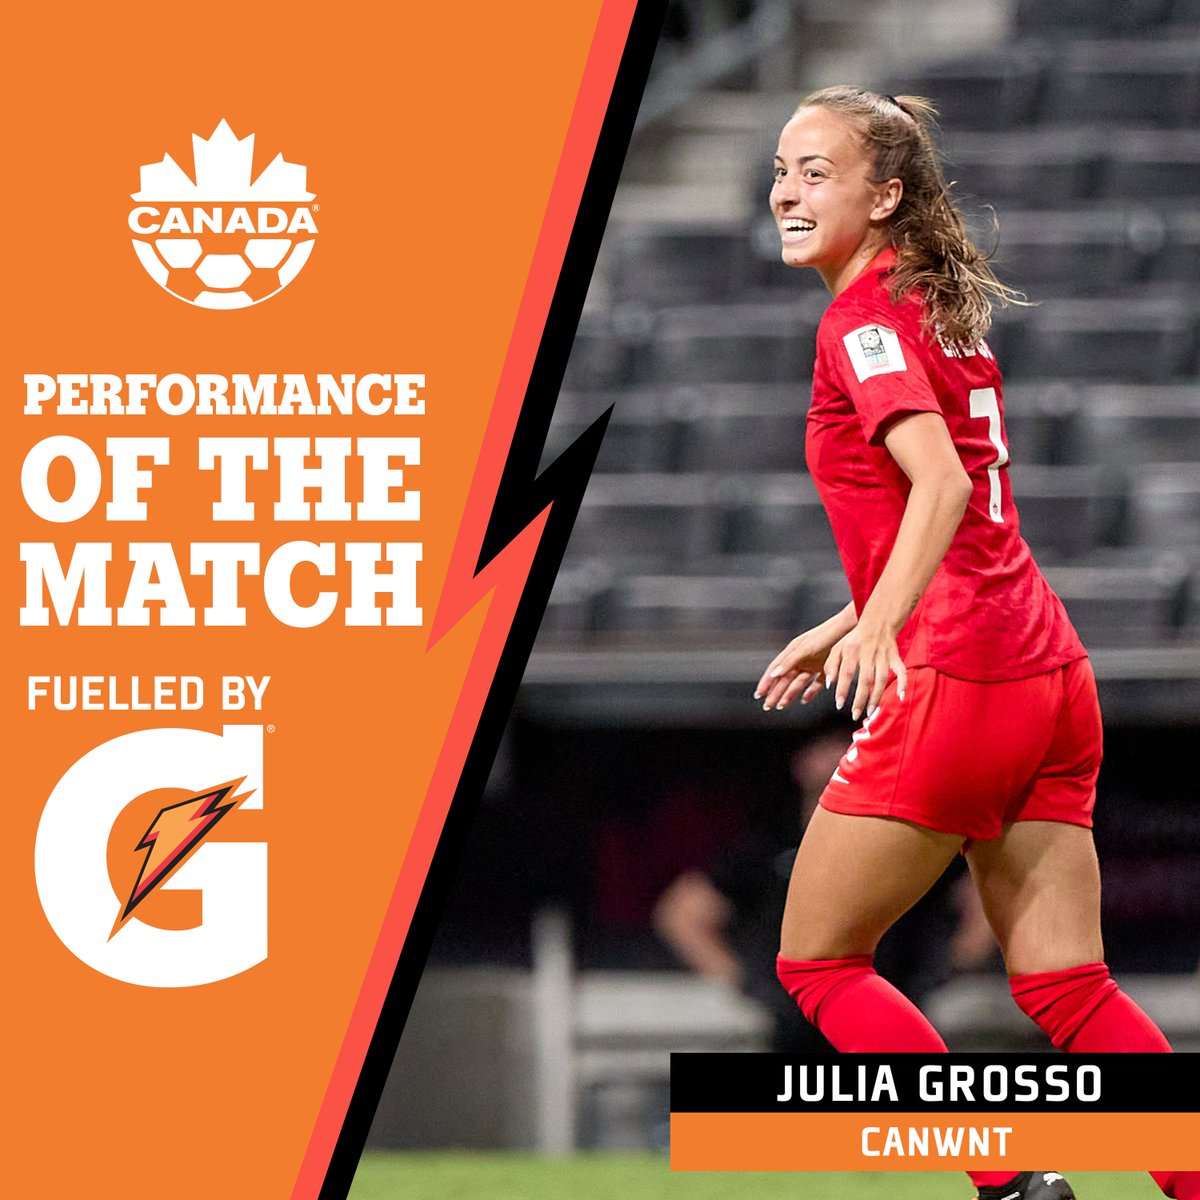 Your @GatoradeCanada Performance of the Match! Julia Grosso, of course 👏 #WeCAN